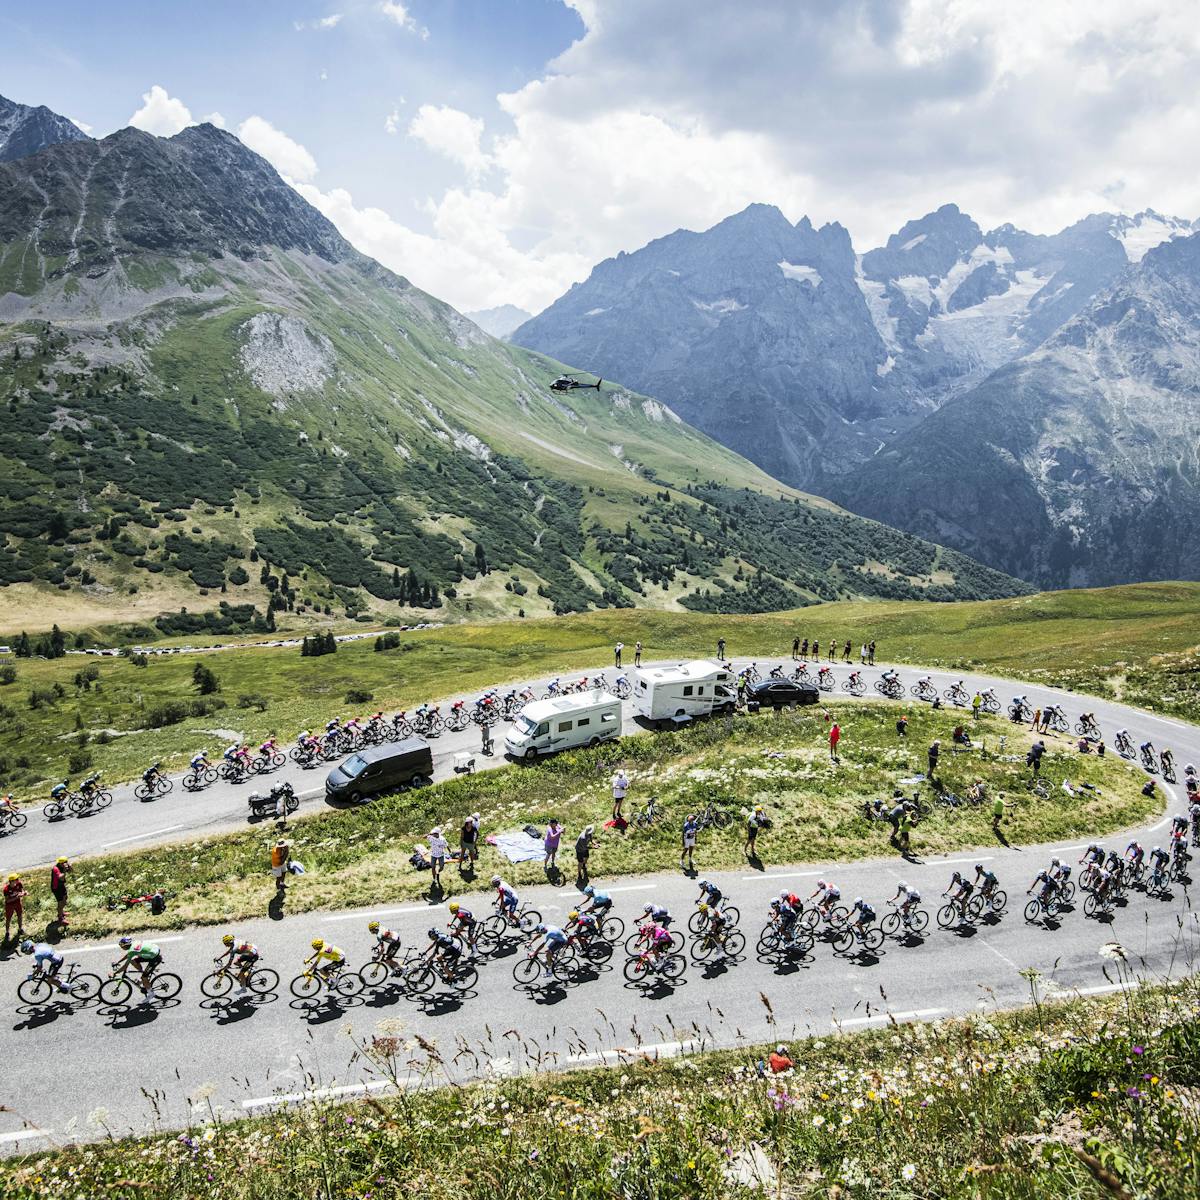 A gorgeous uphill section of the Tour de France, backgrounded by snow-capped mountains.